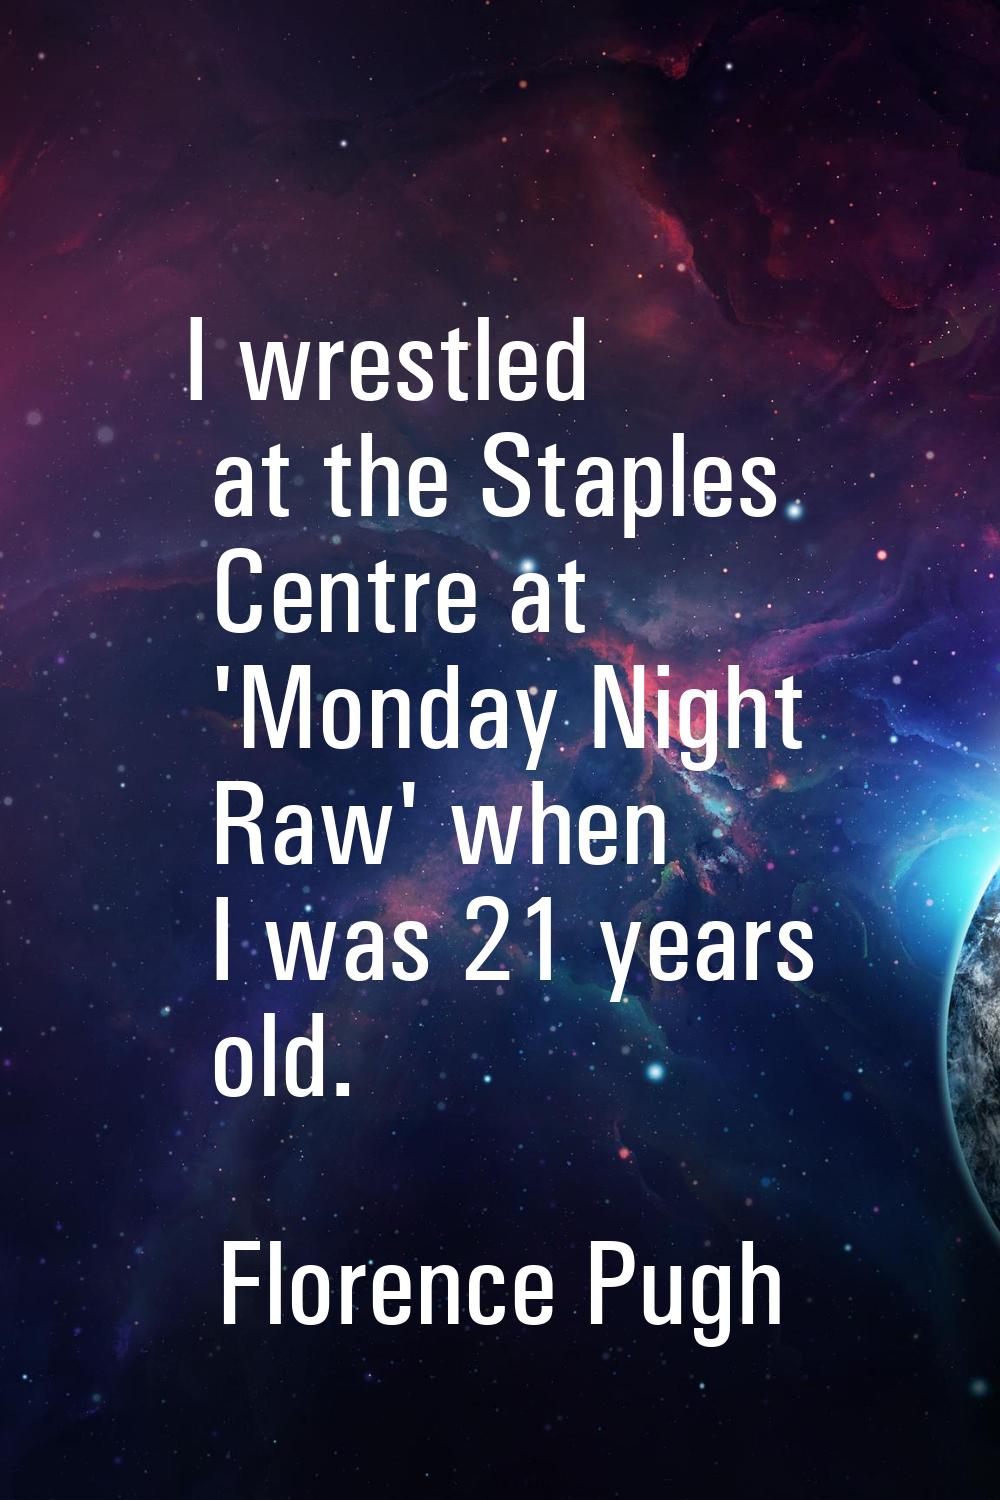 I wrestled at the Staples Centre at 'Monday Night Raw' when I was 21 years old.